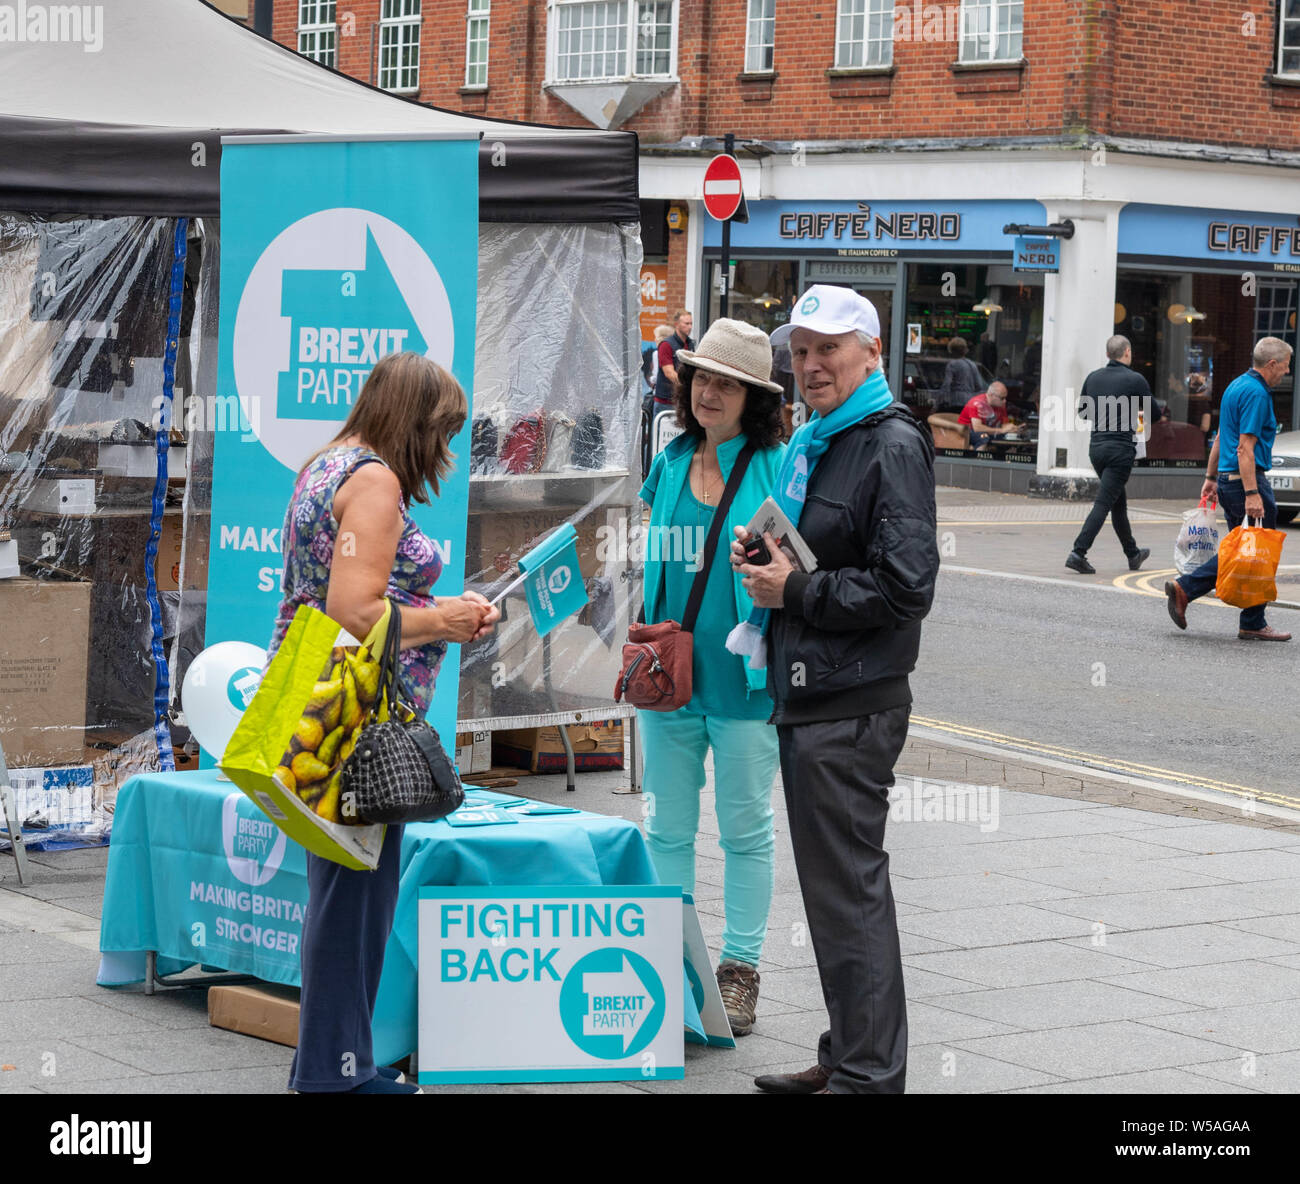 Brentwood Essex 27th July 2019 The Brexit Party Action Day; a stall in Brentwood High Street publicising The Brexit Party Credit Ian Davidson/Alamy Live News Stock Photo